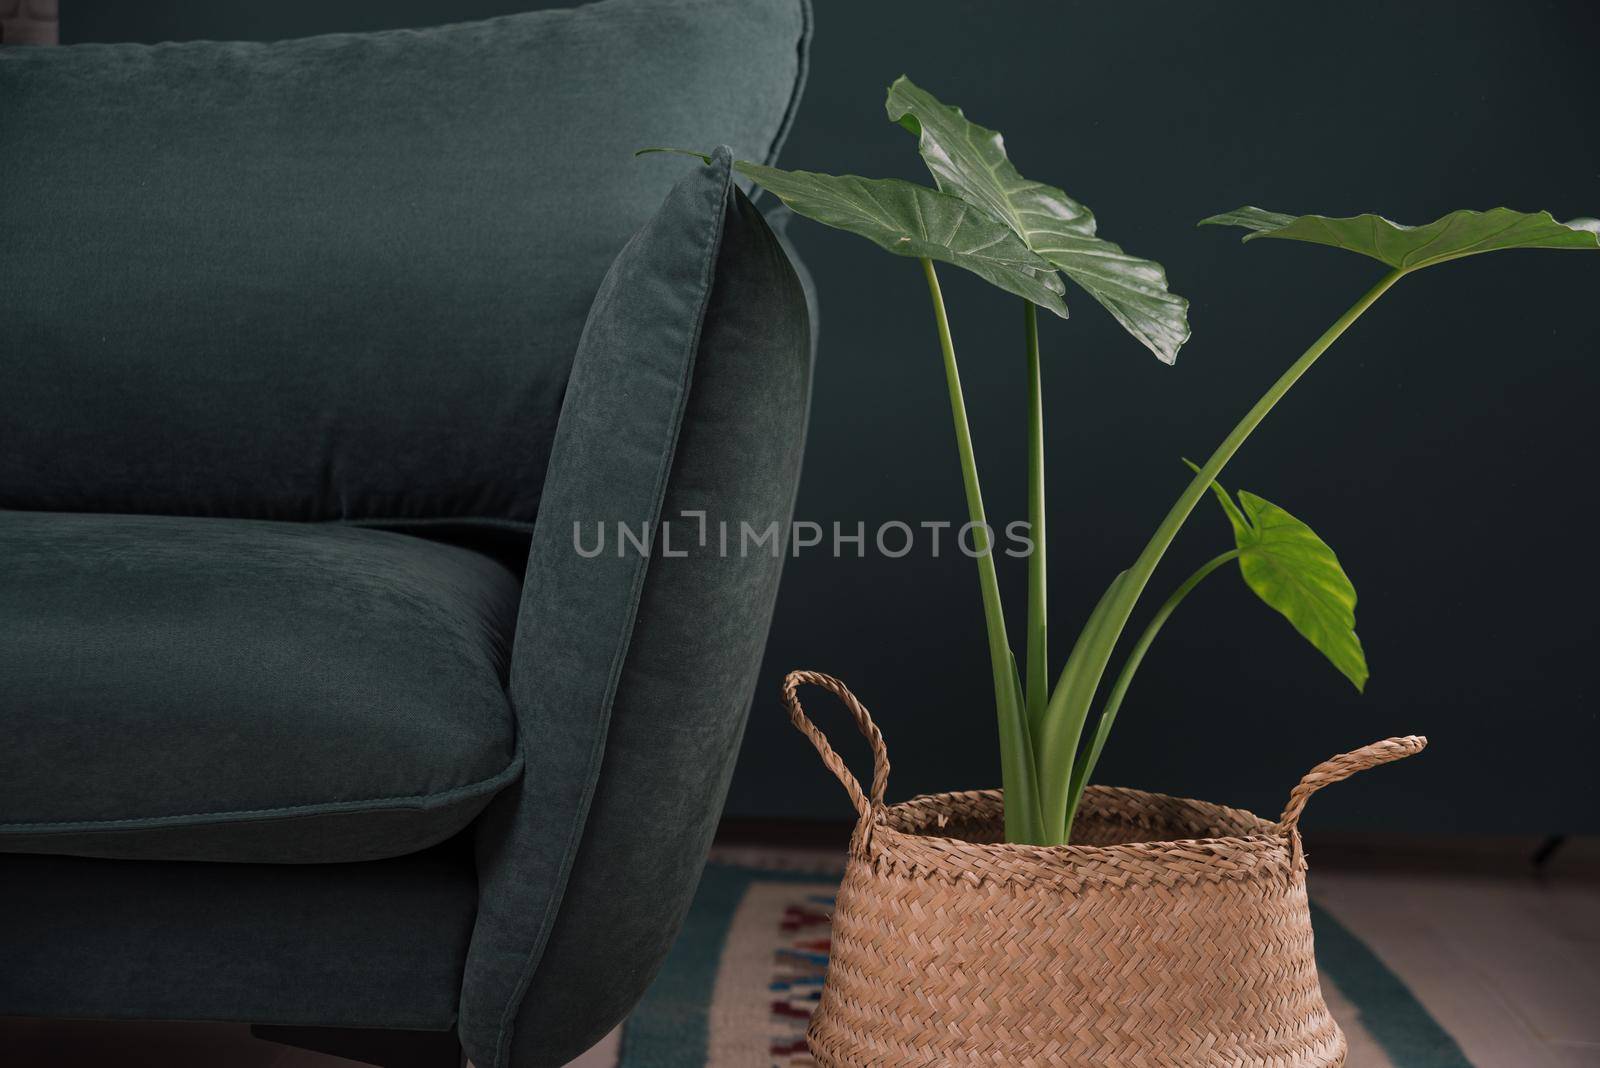 modern scandinavian couch with plant near. urban jungle. High quality photo